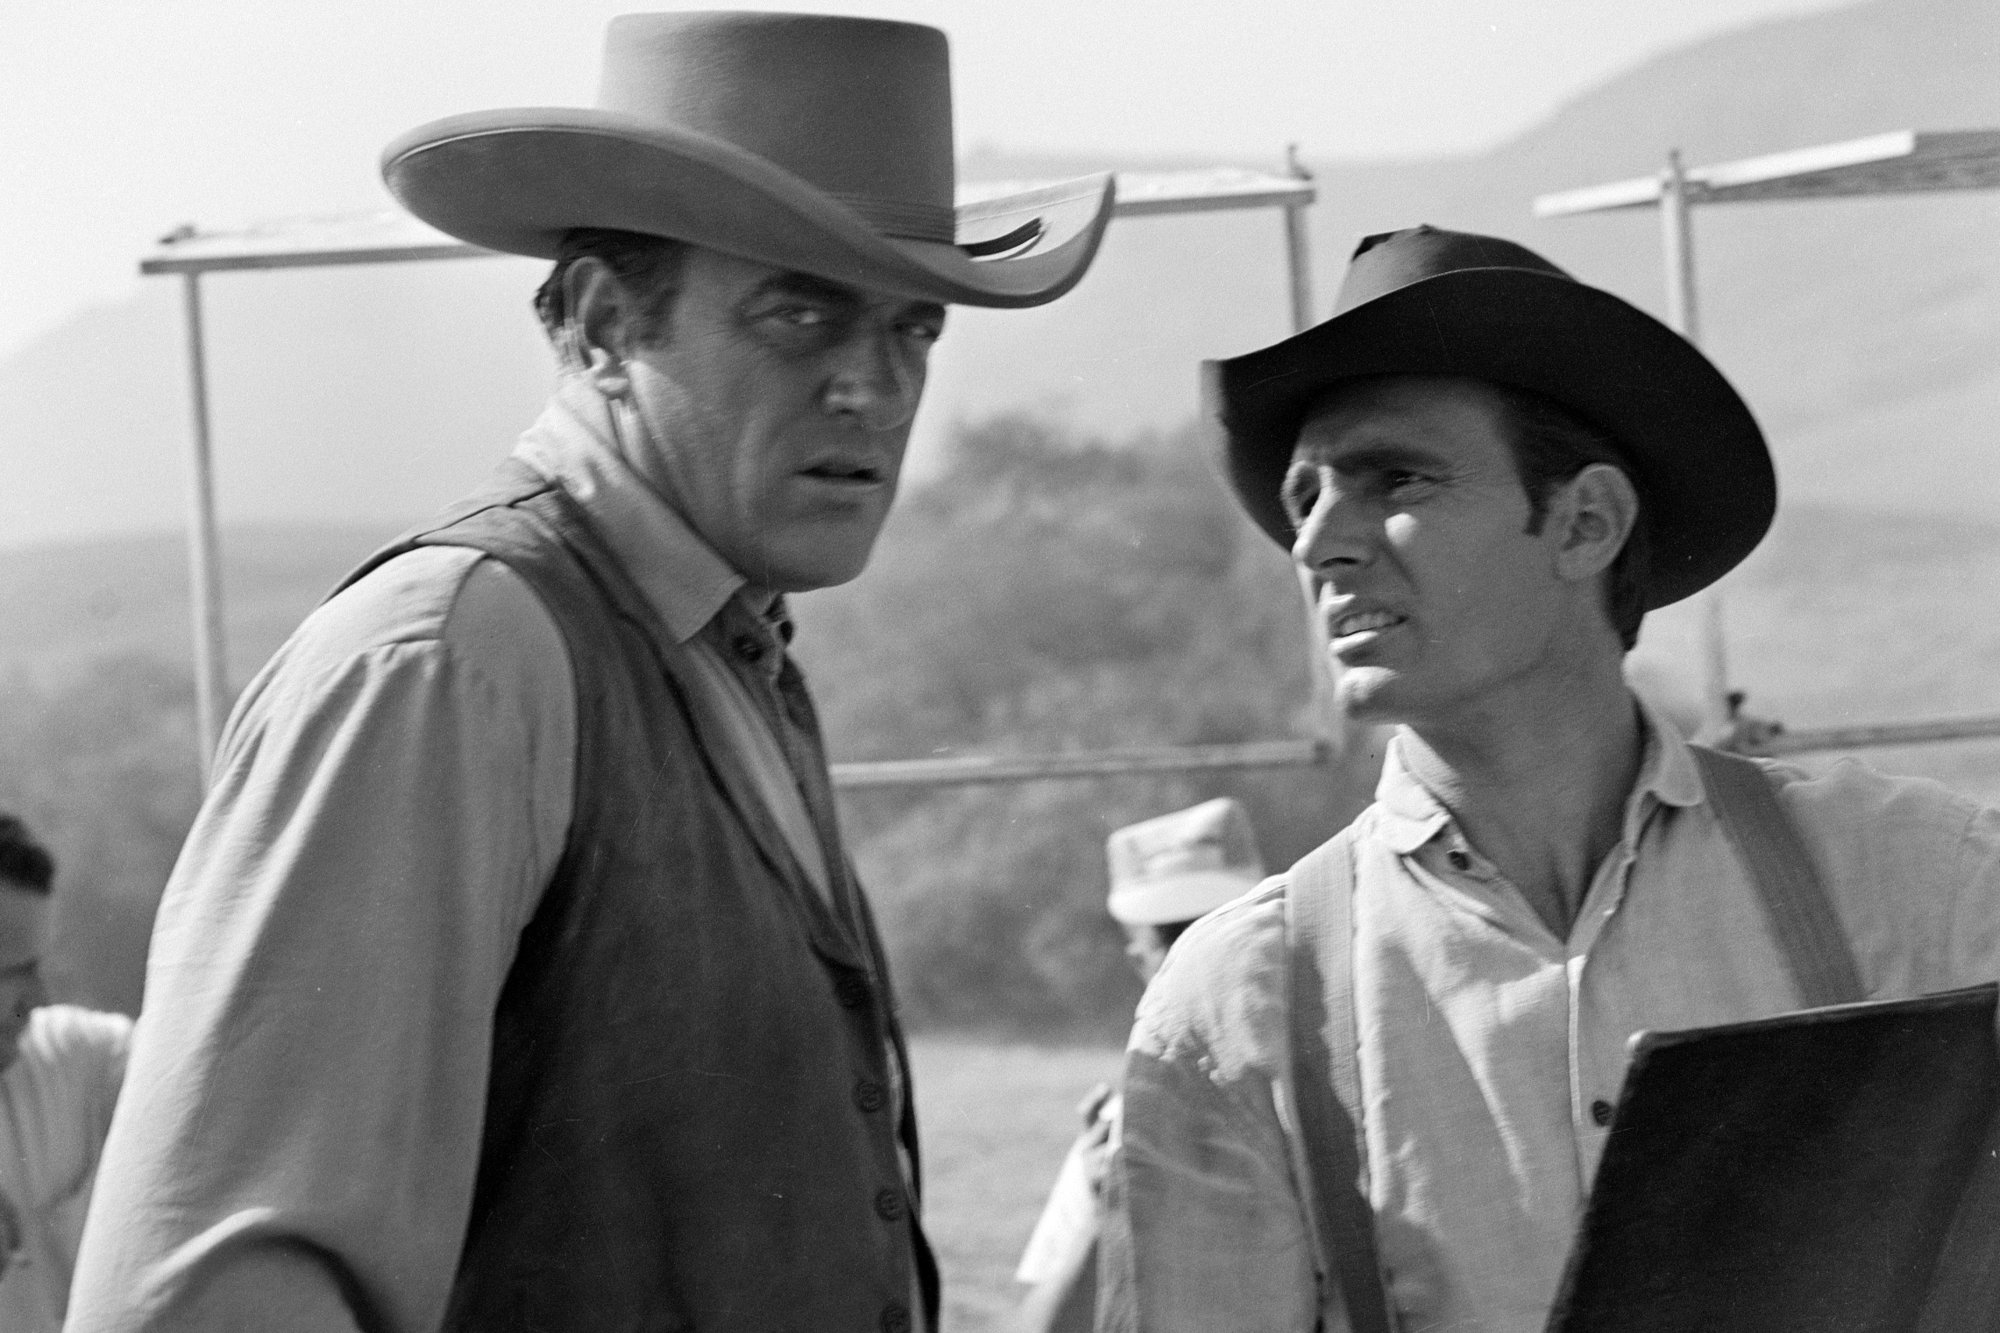 'Gunsmoke' James Arness as Marshal Matt Dillon and Dennis Weaver as Chester Goode. Weaveris looking up at Arness, who is giving a serious look to the camera.